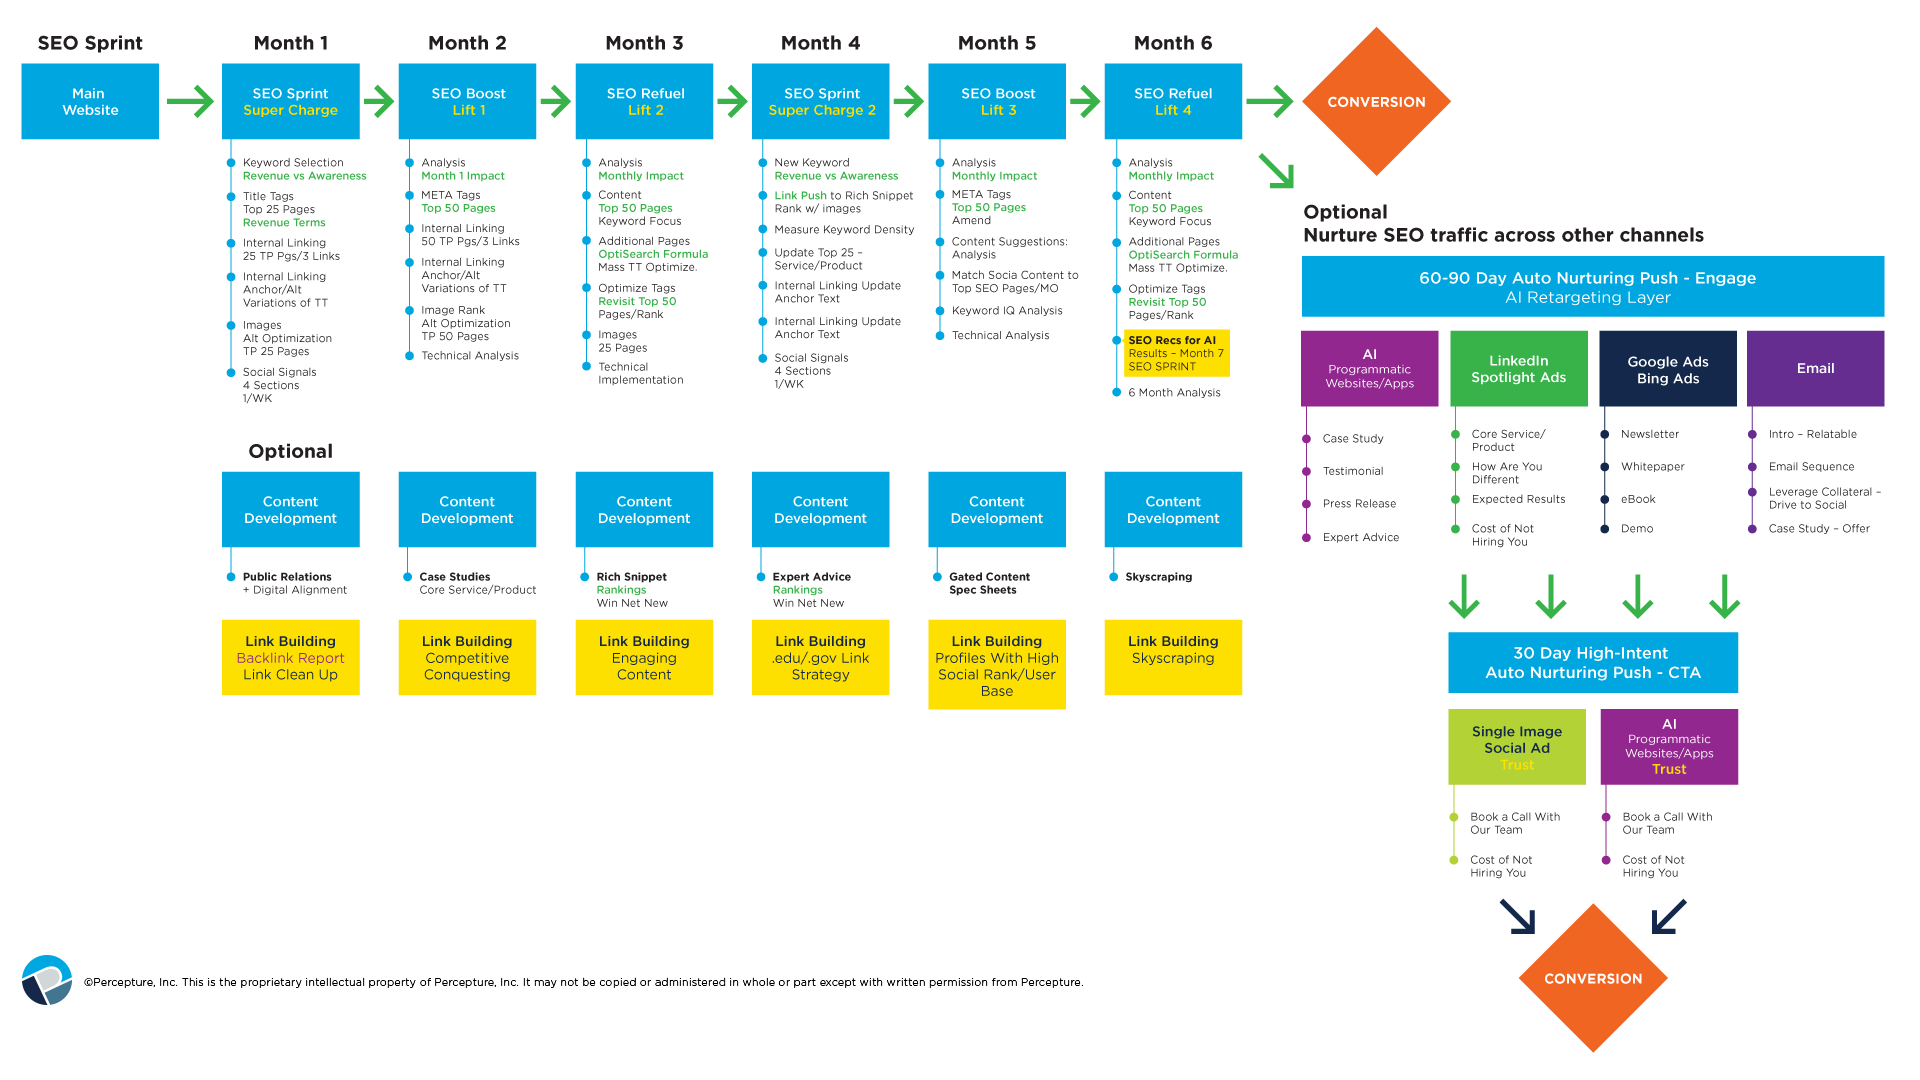 a mapped strategy in flow chart format and process sample of Percepture's SEO services.